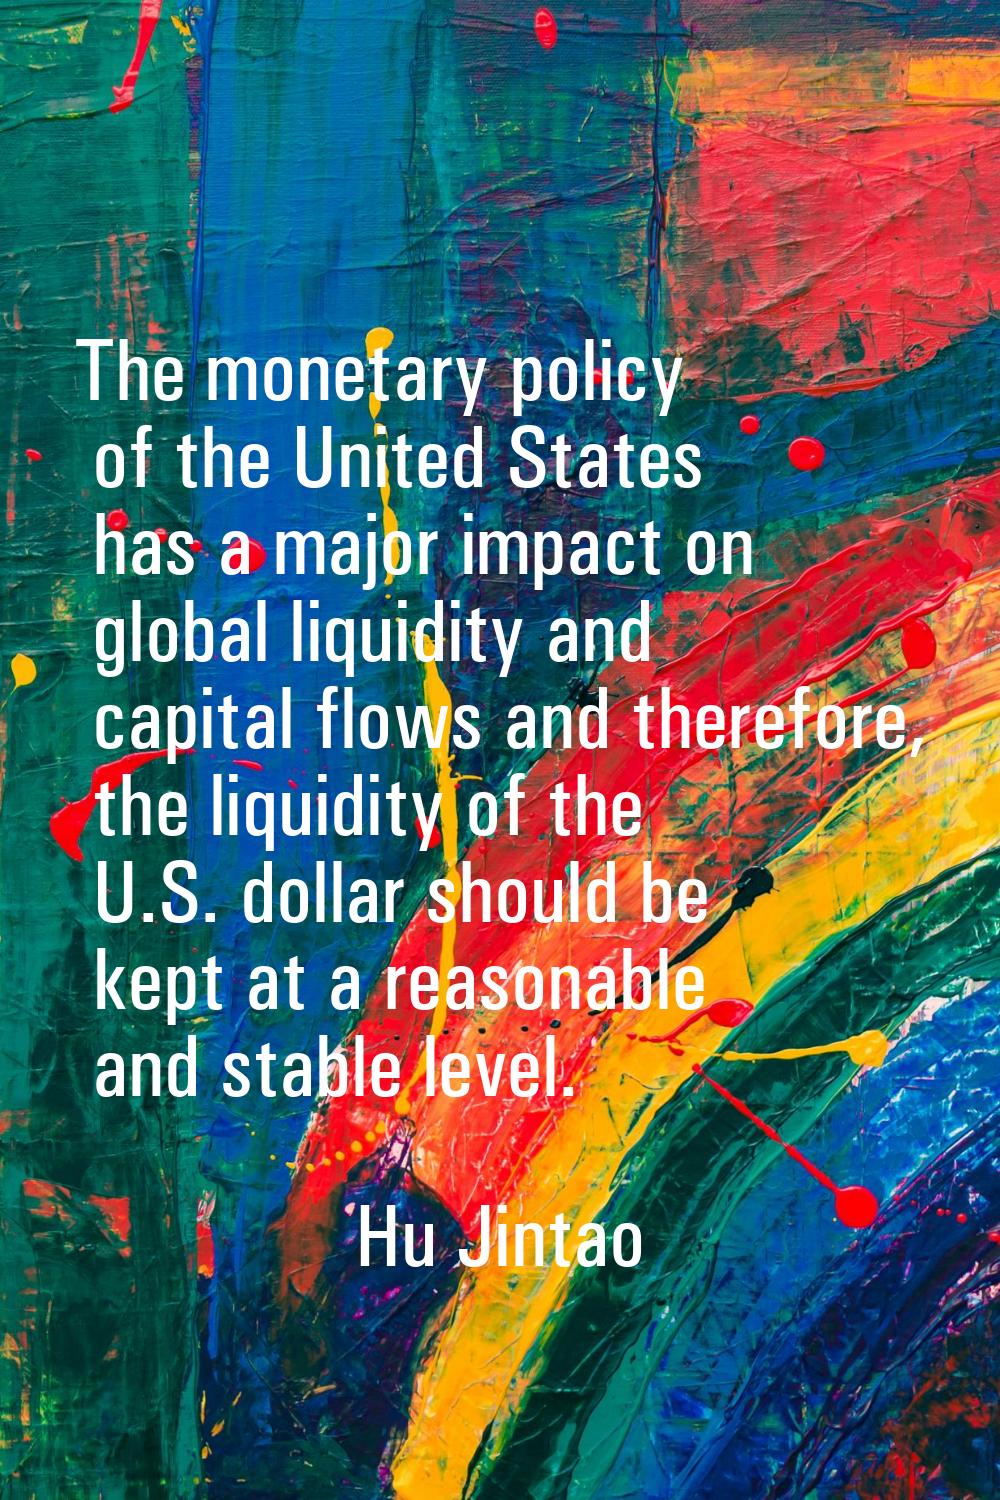 The monetary policy of the United States has a major impact on global liquidity and capital flows a